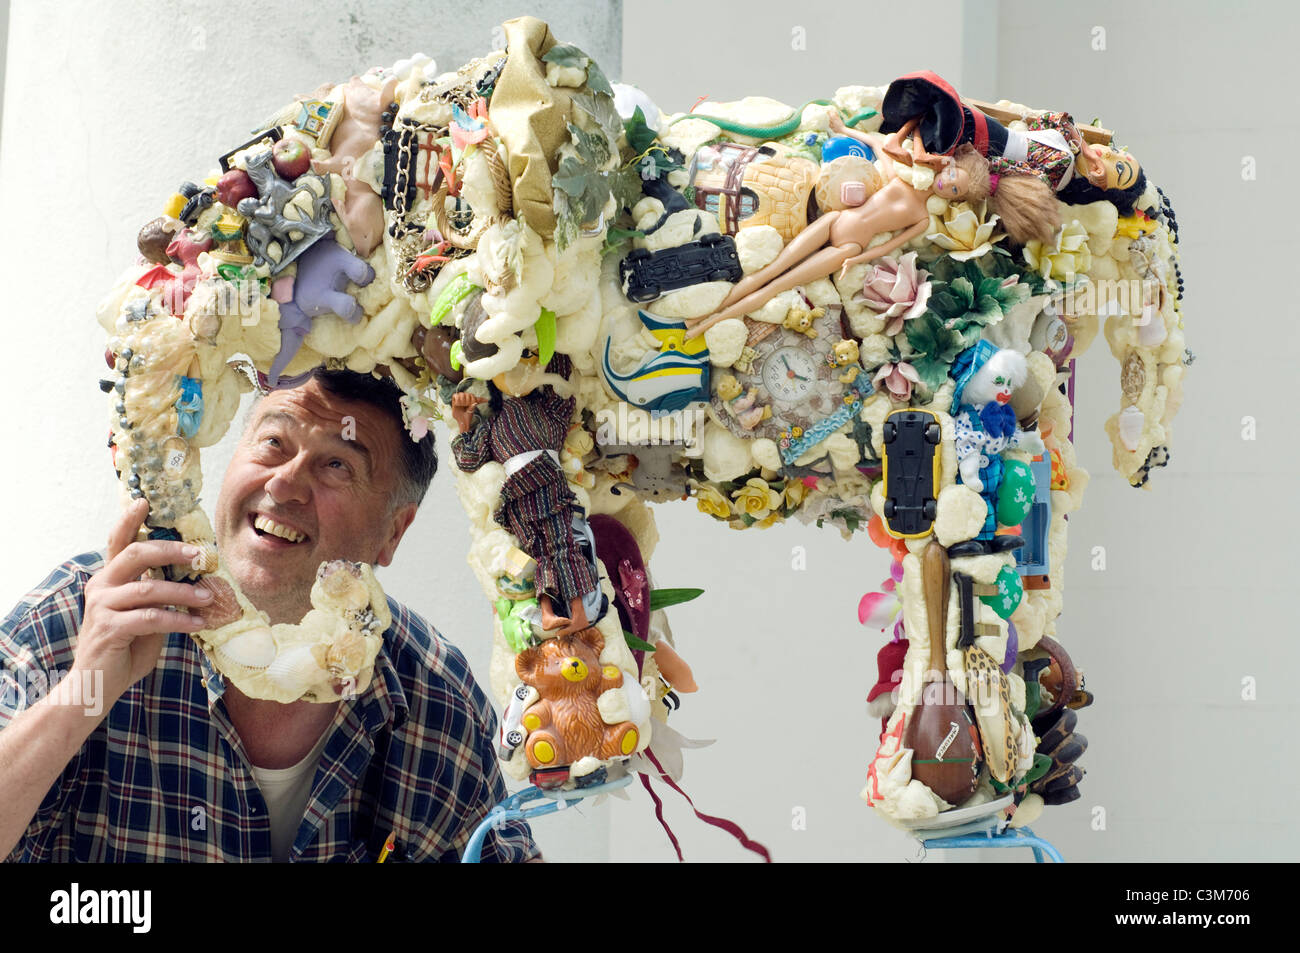 Sculptor Anthony Heywood lifts his sculpture 'Earth Elephant' made from recycled objects. Stock Photo